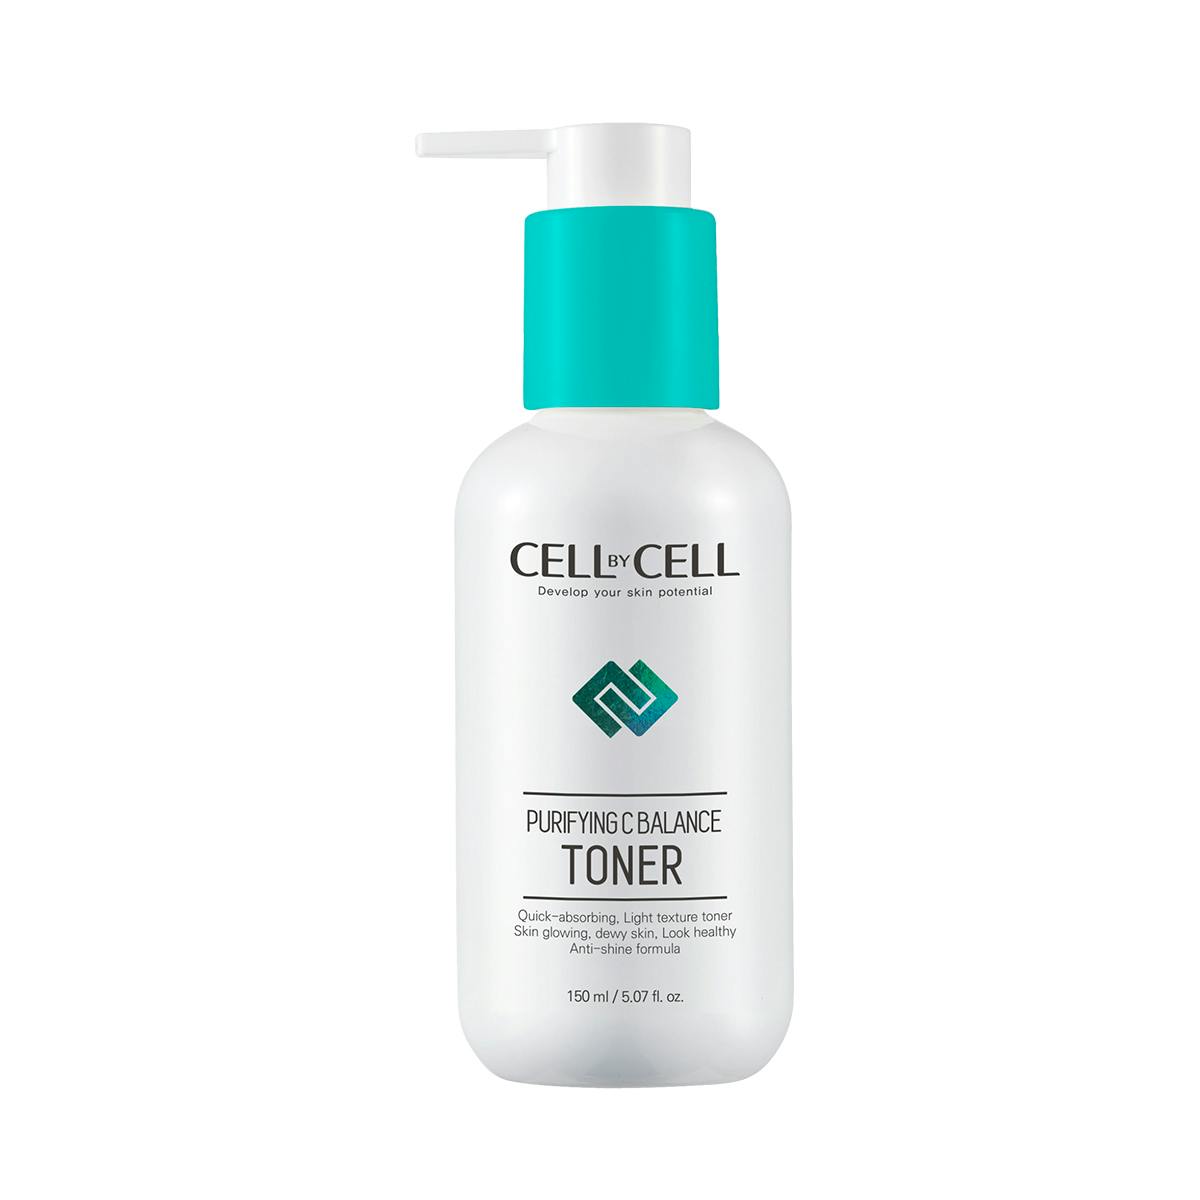 CELL BY CELL - PURIFYING C BALANCE TONER 150 ml.